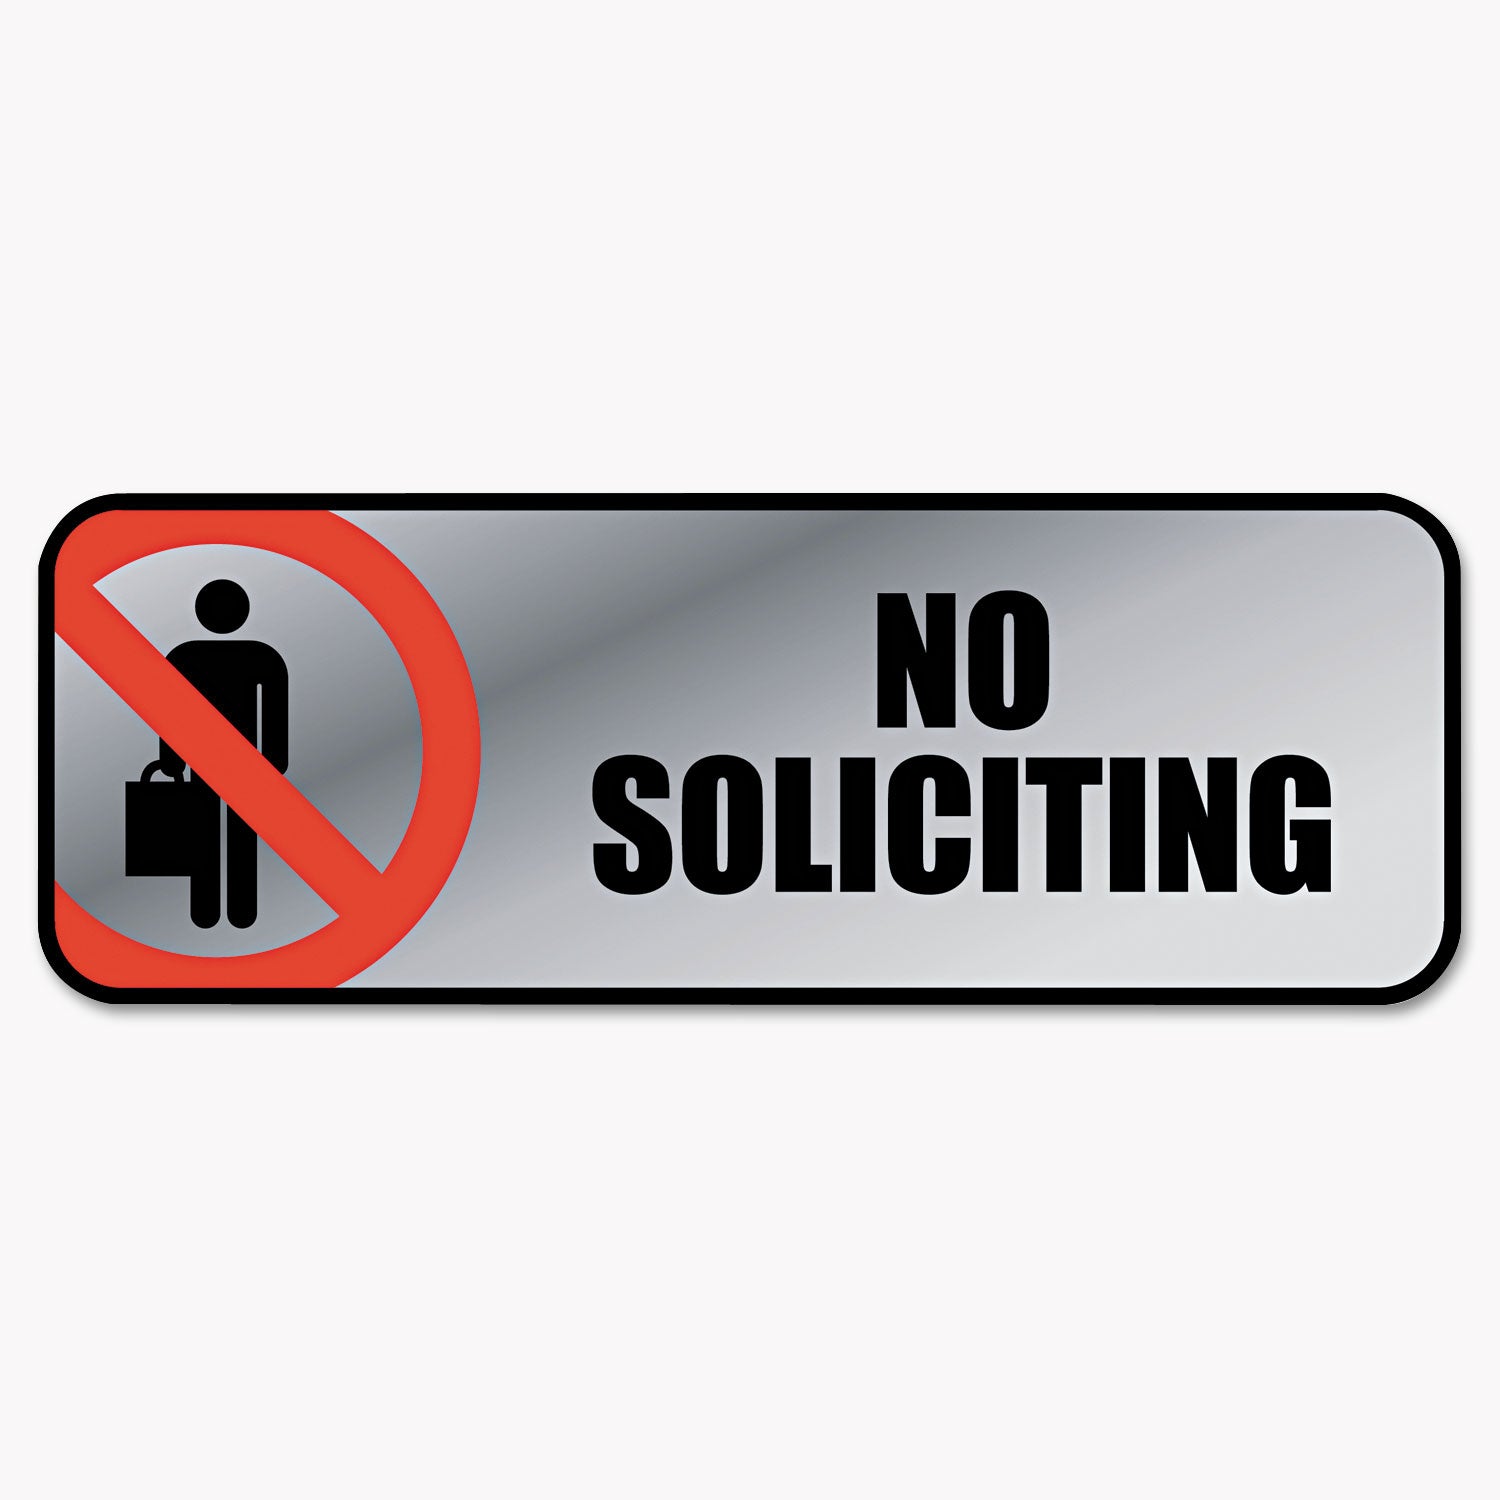 Brushed Metal Office Sign, No Soliciting, 9 x 3, Silver/Red - 